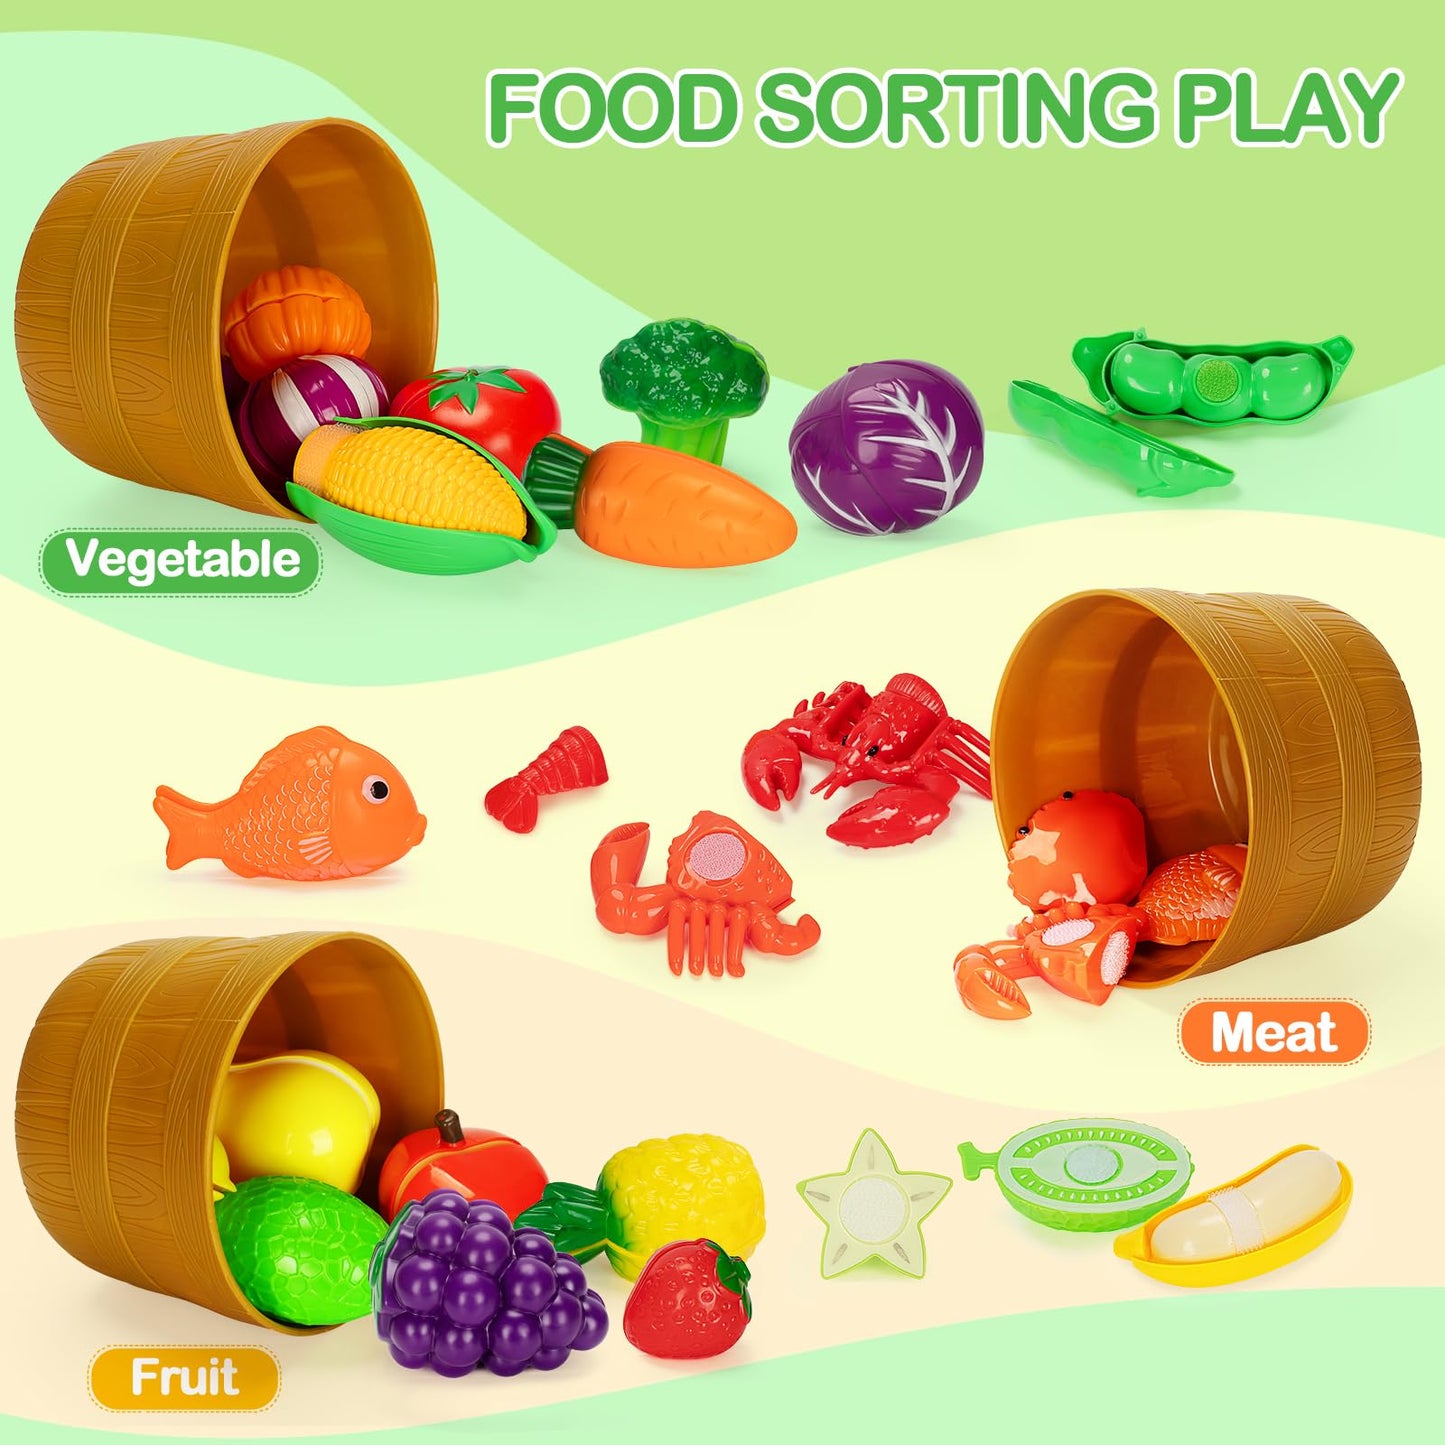 TooyBing Play Food Set for Kids Kitchen- 68 Pcs Pretend Kitchen Food Toy for Toddlers, Cutting & Color Sorting Fake Food/ Fruit/ Vegetable Accessories, Birthday Gifts for 2 3 4 5 Years Old Boys Girls